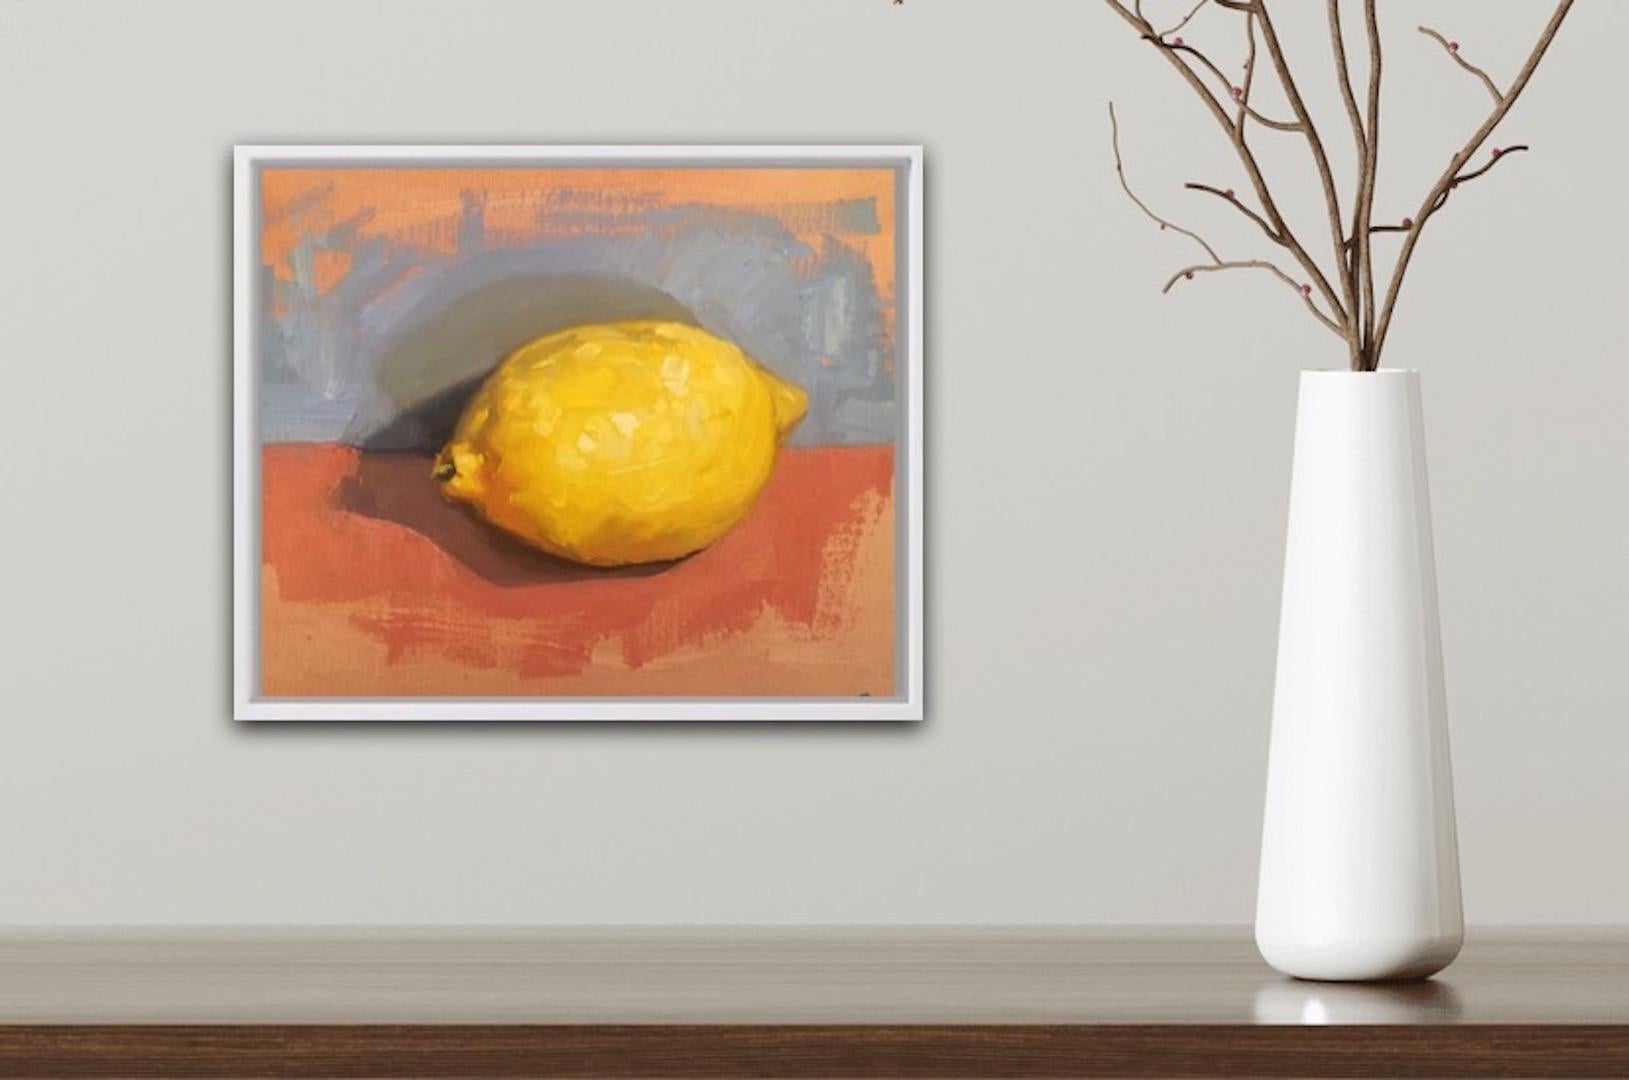 Benedict Flanagan
Lemon
Original Still Life Painting
Oil Paint on Board
Board Size: H 20cm x W 25cm x D 0.5cm
Sold Unframed
Please note that in situ images are purely an indication of how a piece may look.

Lemon is a still life painting by Benedict